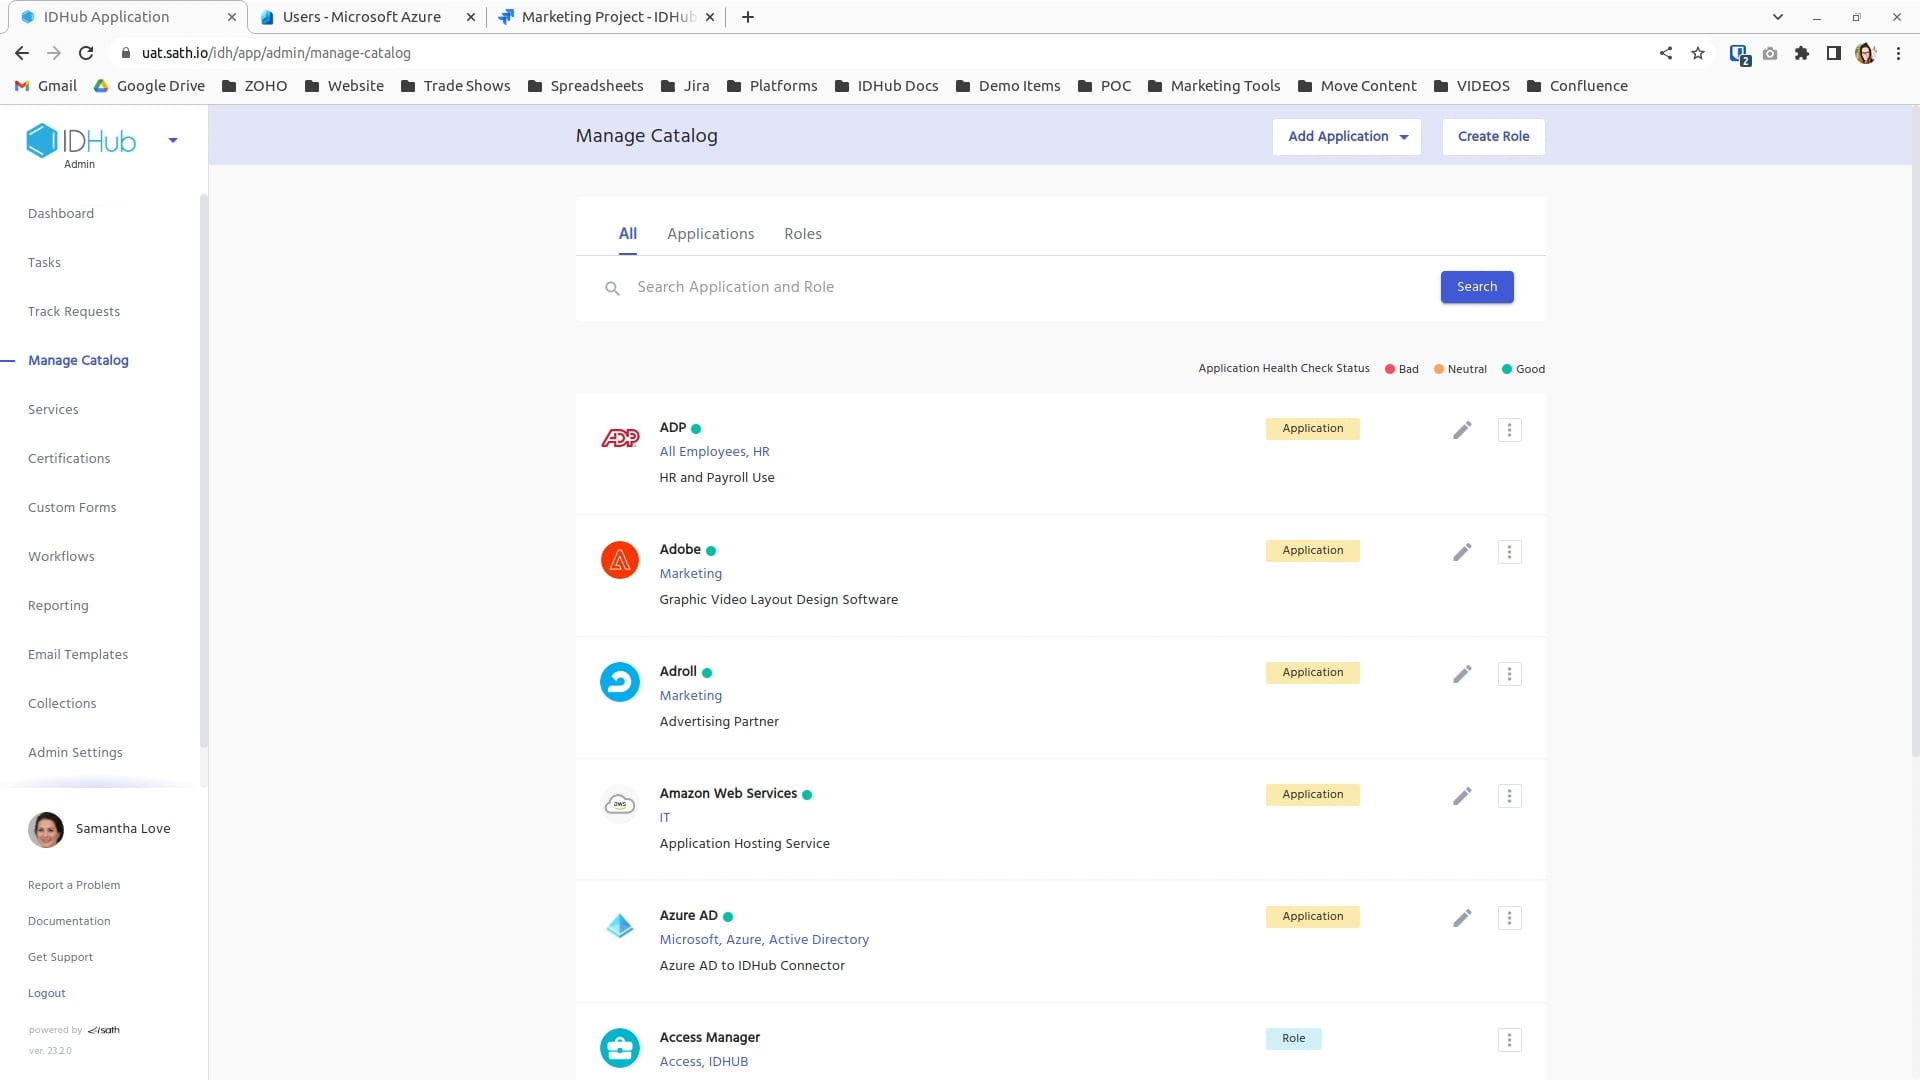 Connection to Azure AD and Jira Software - Add a new user to Azure and provision to IDHub Role and then to Jira